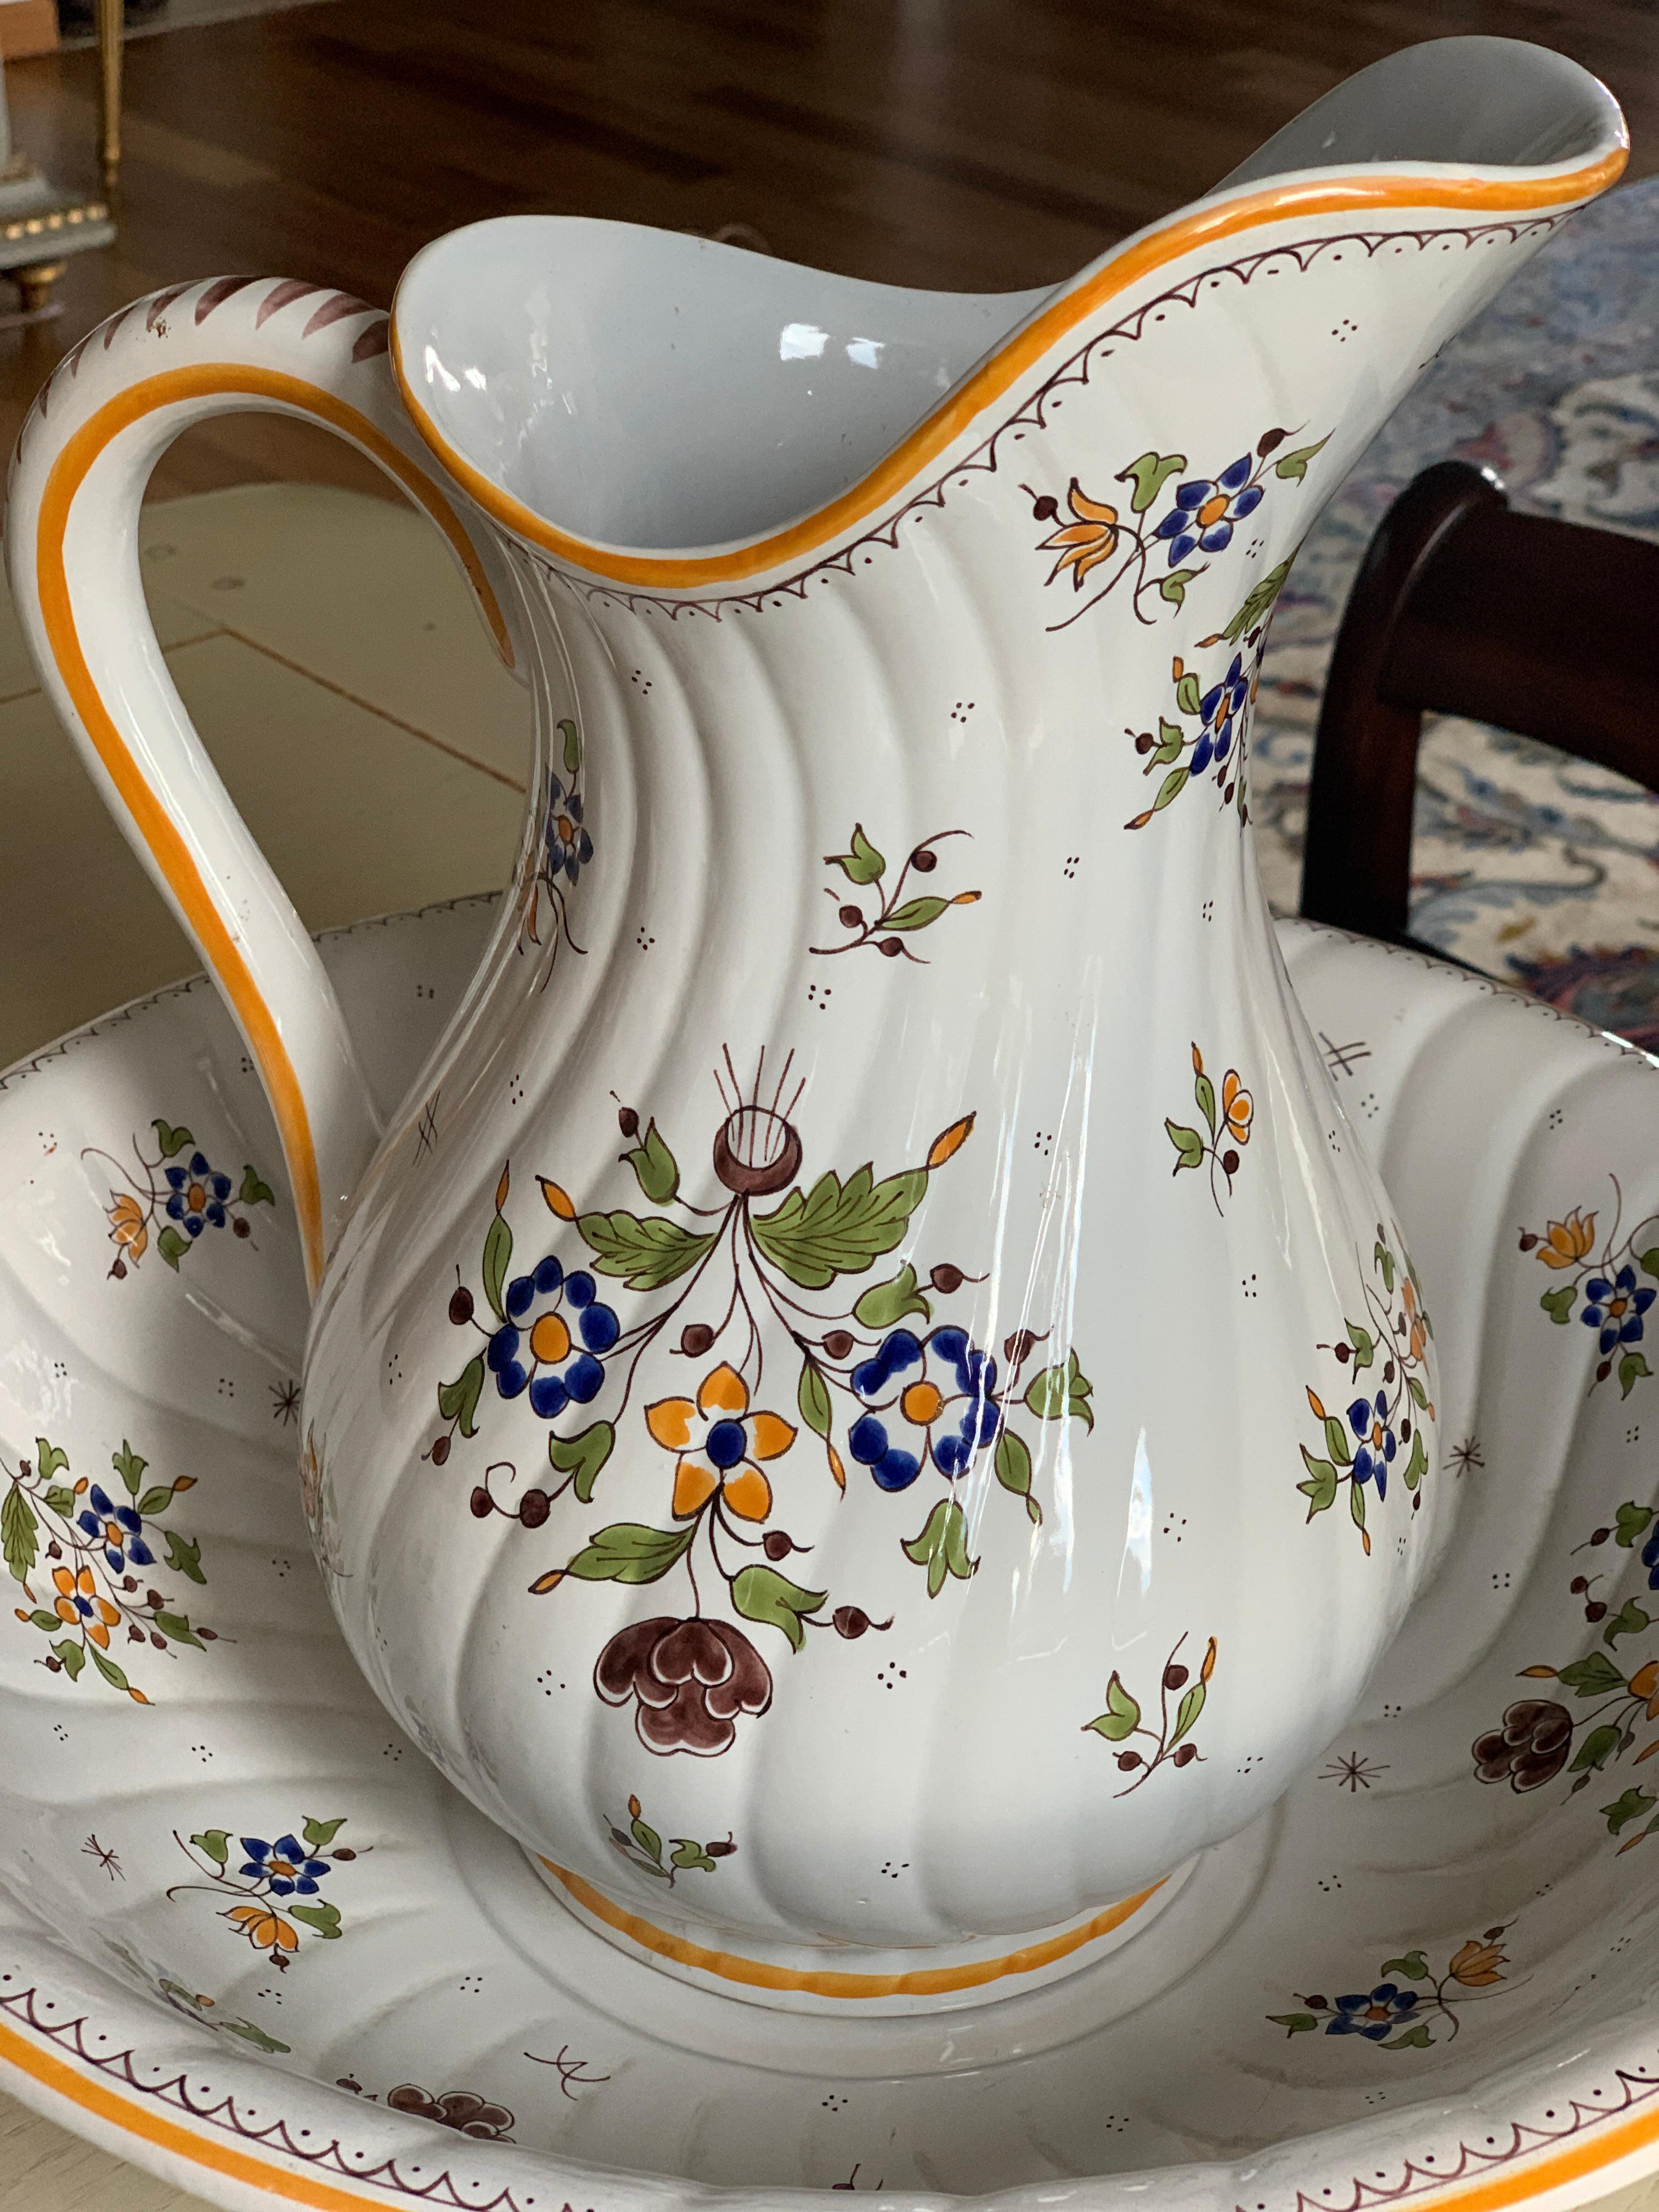 French hand painted ceramic pitcher and bowl by Moustiers with typical floral and birds decorations.
France, circa 1970
Very good condition.